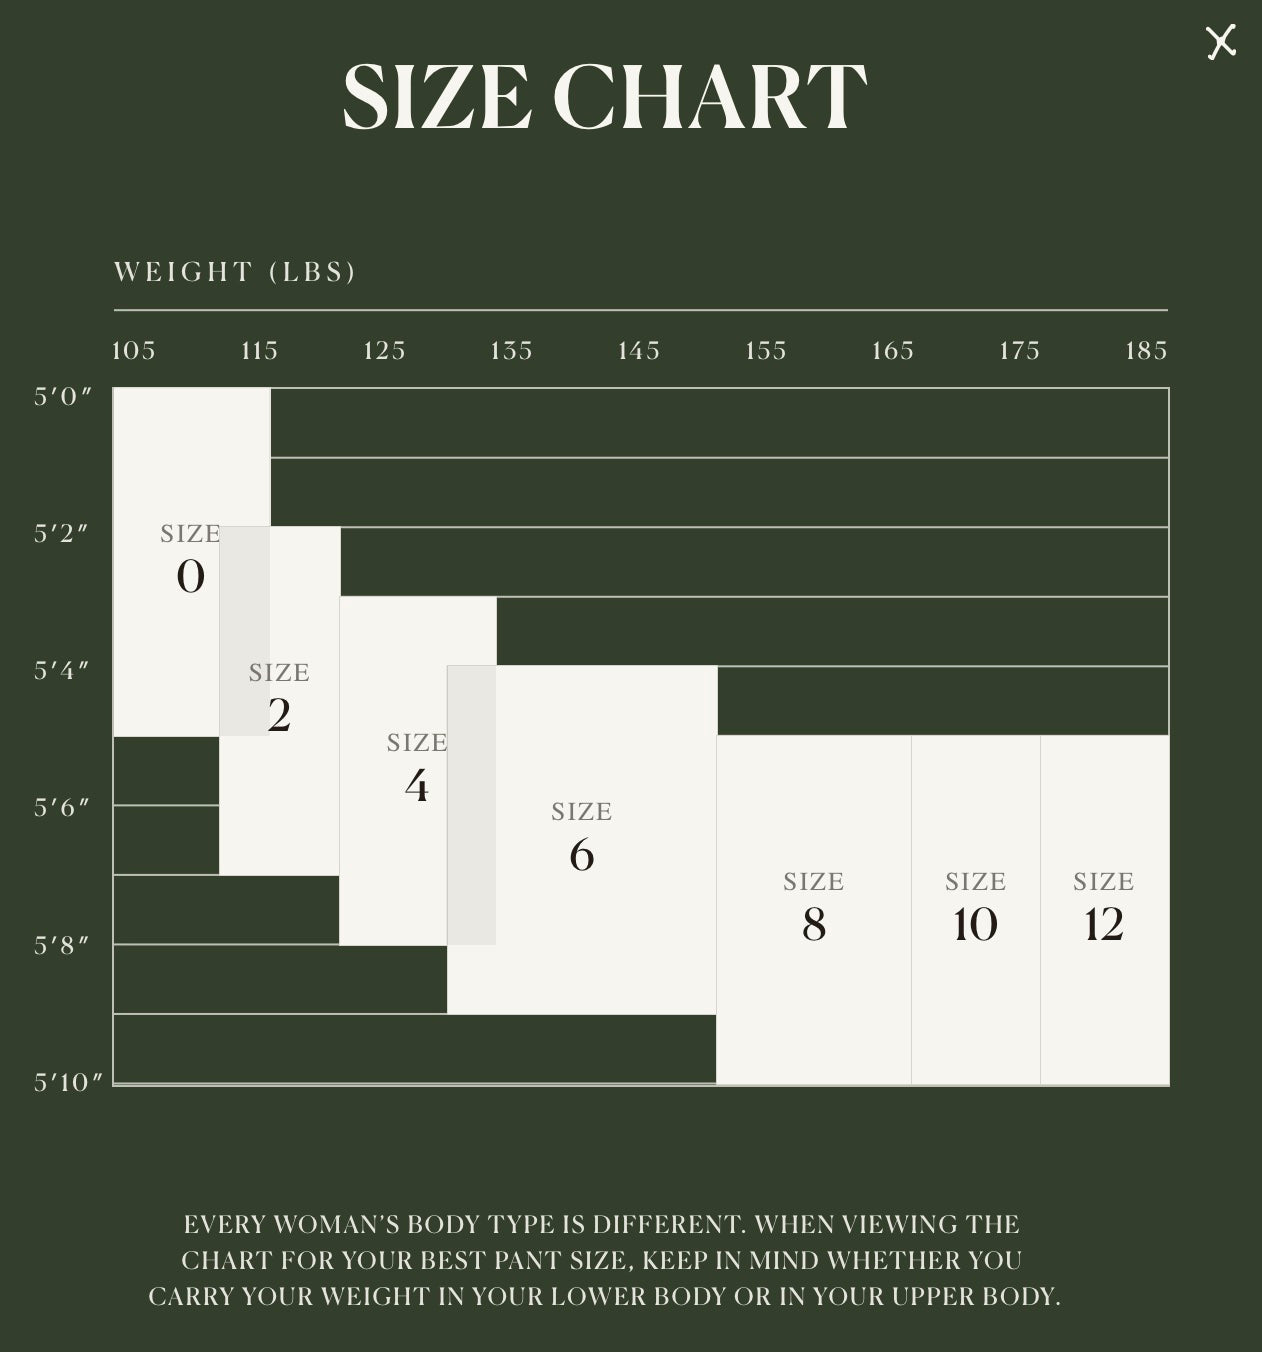 A size chart illustrating the relationship between height, weight, and dress sizes for women.